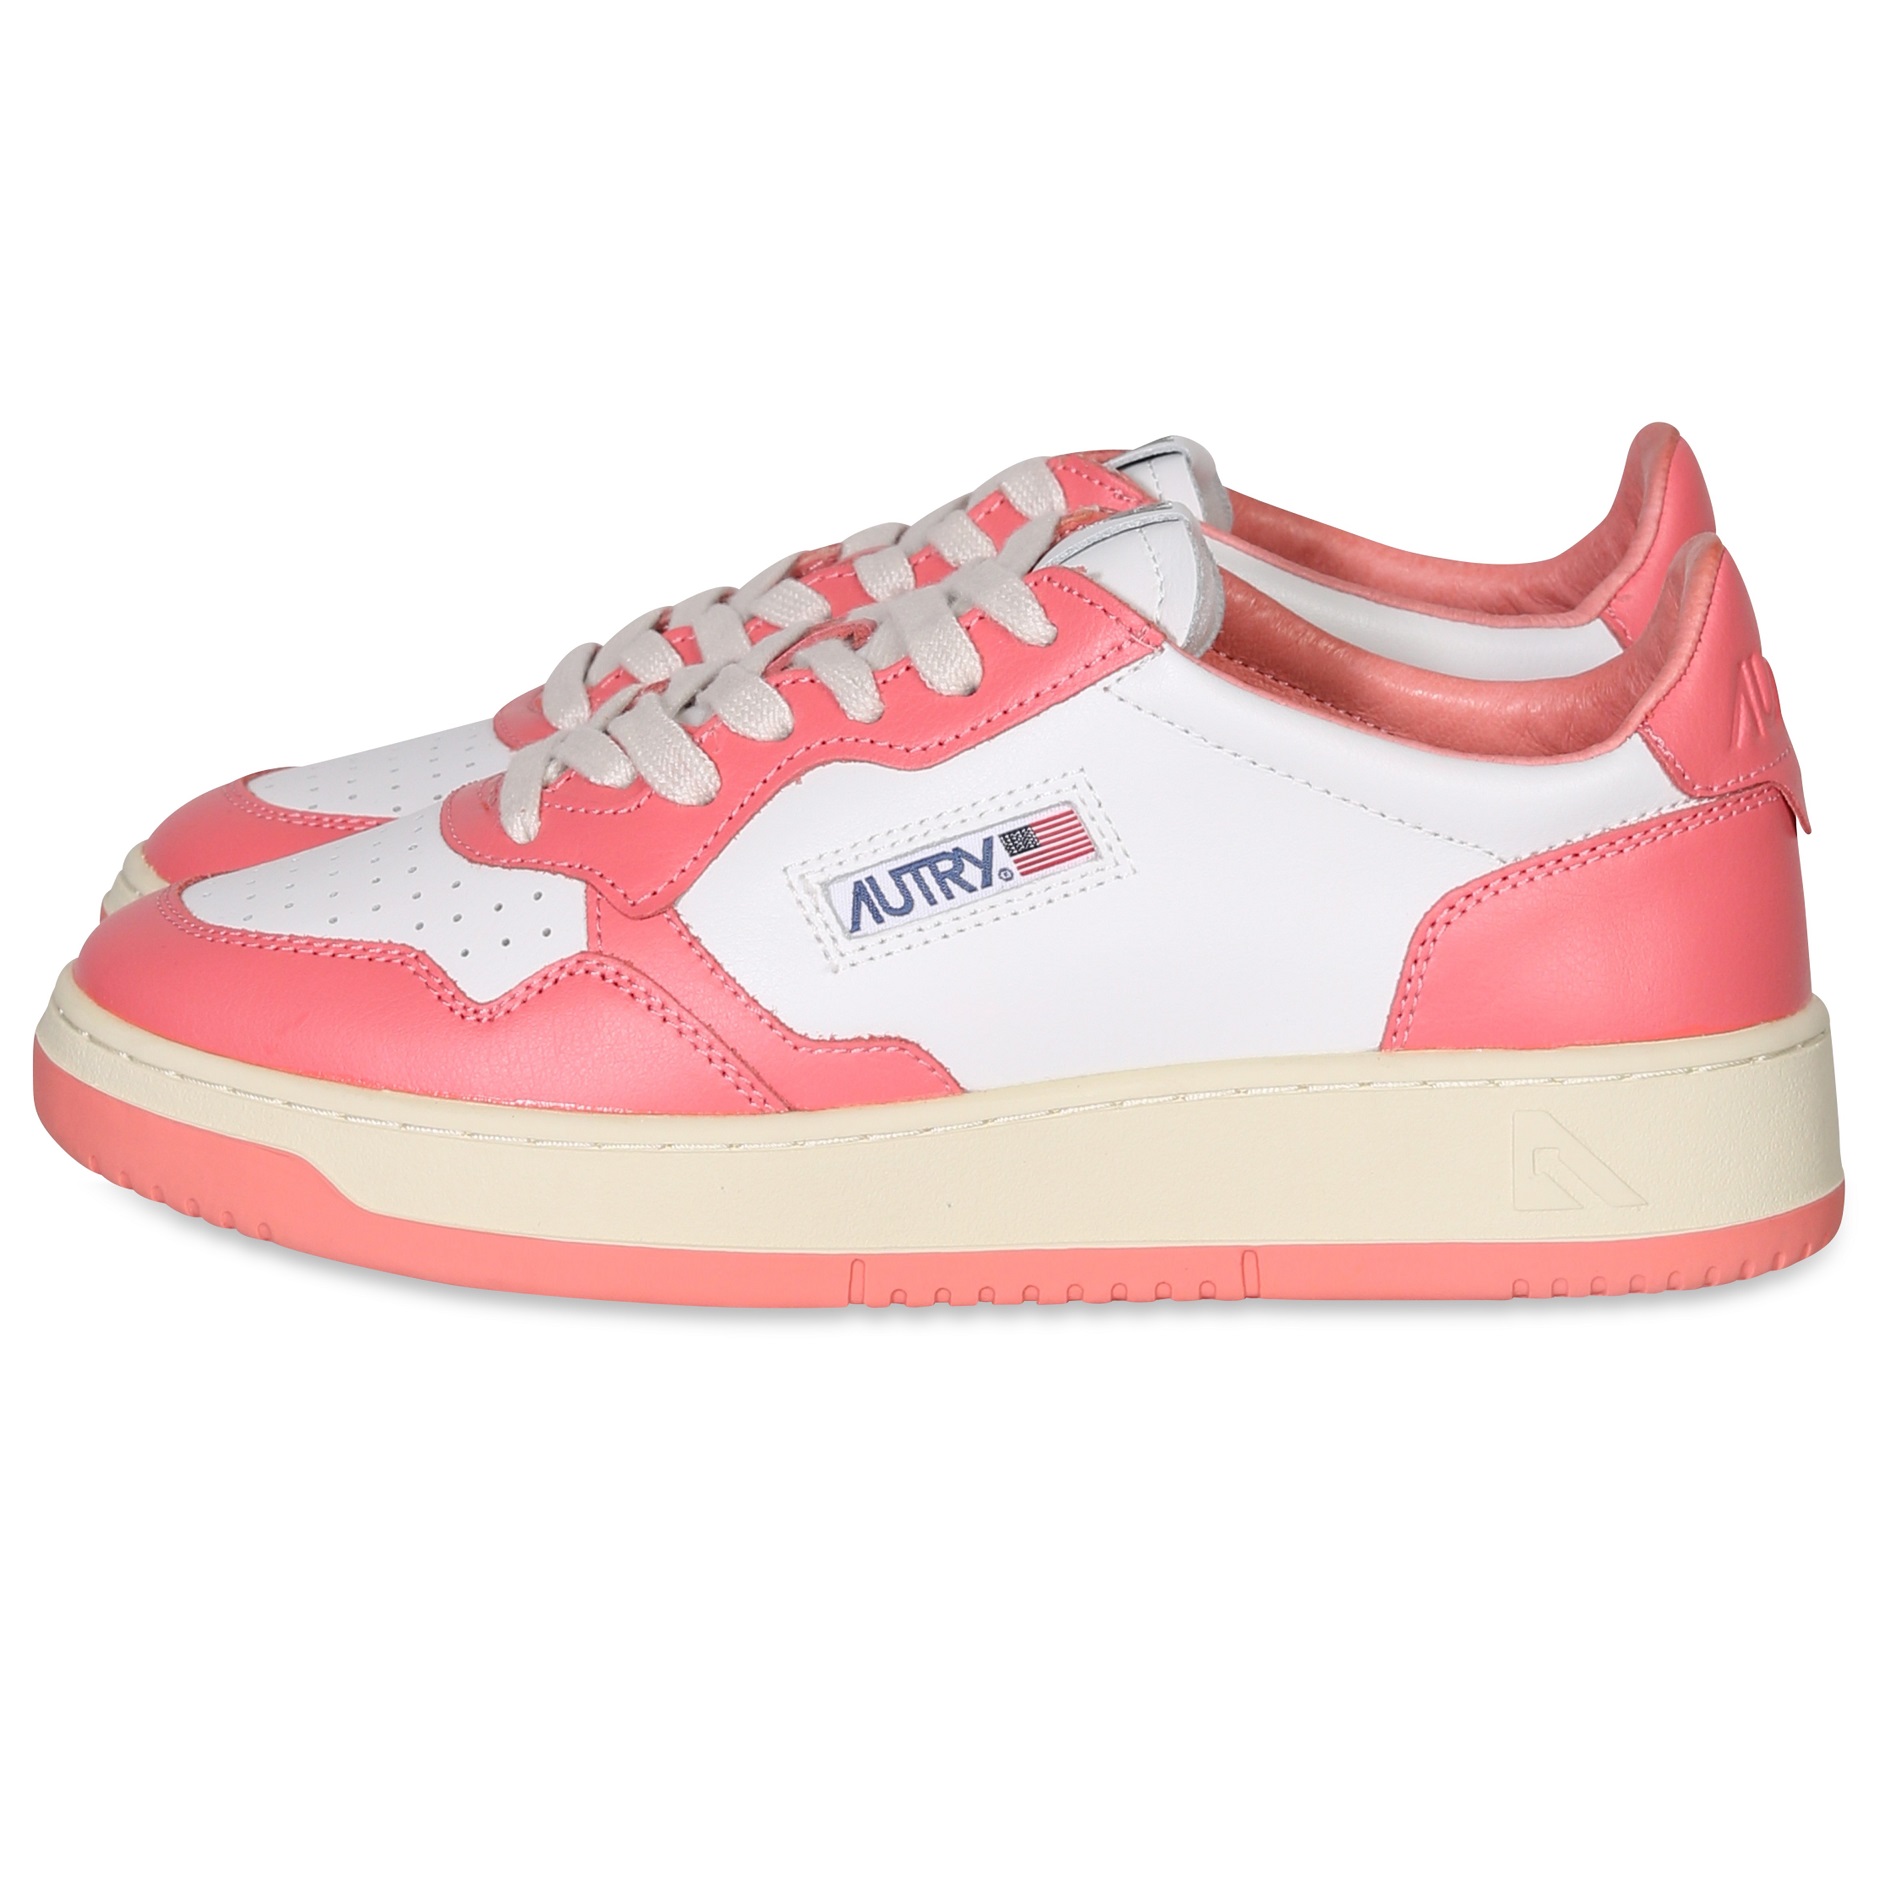 AUTRY ACTION SHOES Low Sneaker White/Tangerine 35